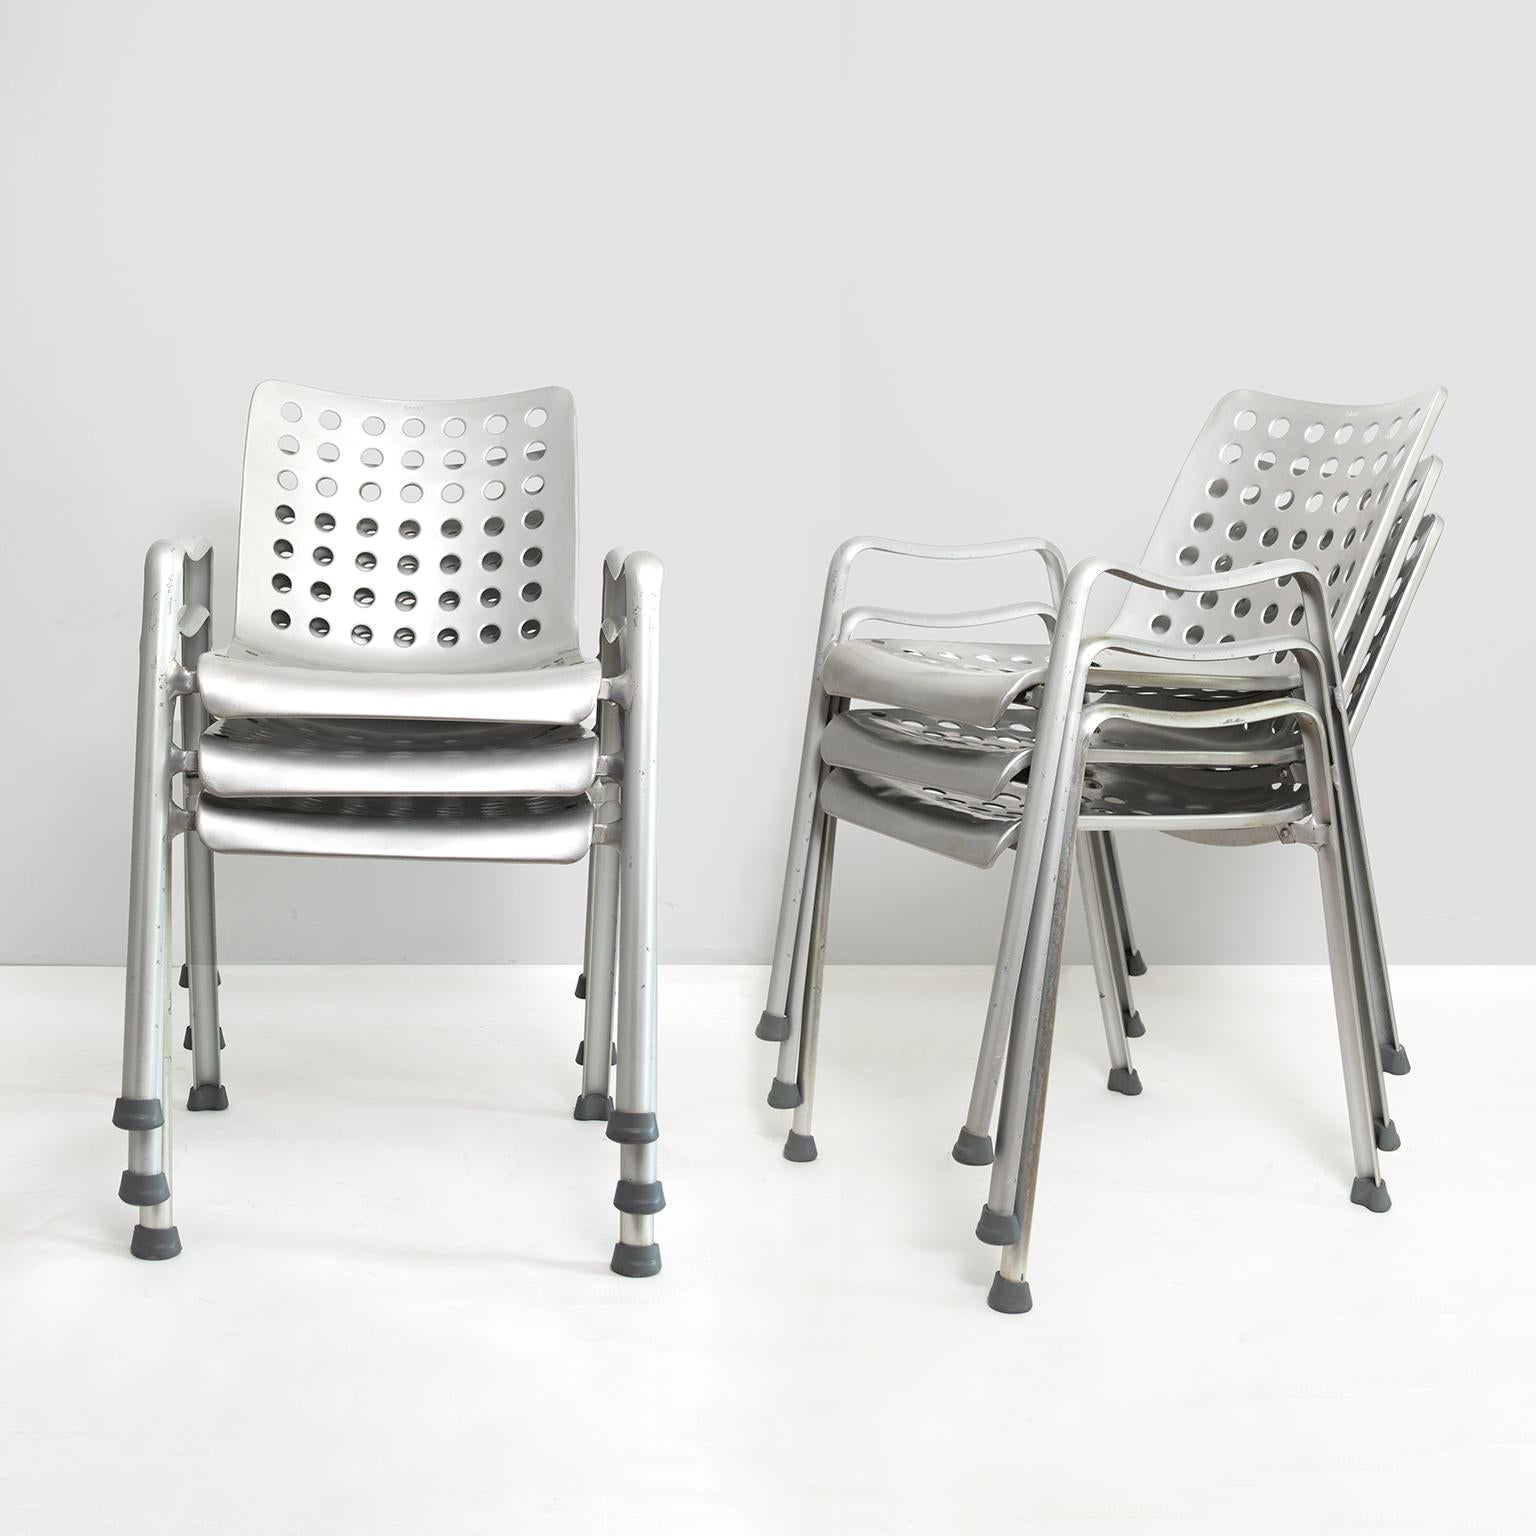 Set of 6 vintage Hans Coray aluminum “Landi” chairs. These examples have 91 holes in total which dates their manufacturing pre-1960. The Landi chairs were designed in the 1930s in Switzerland. 

Good vintage condition, some oxidation, scratched